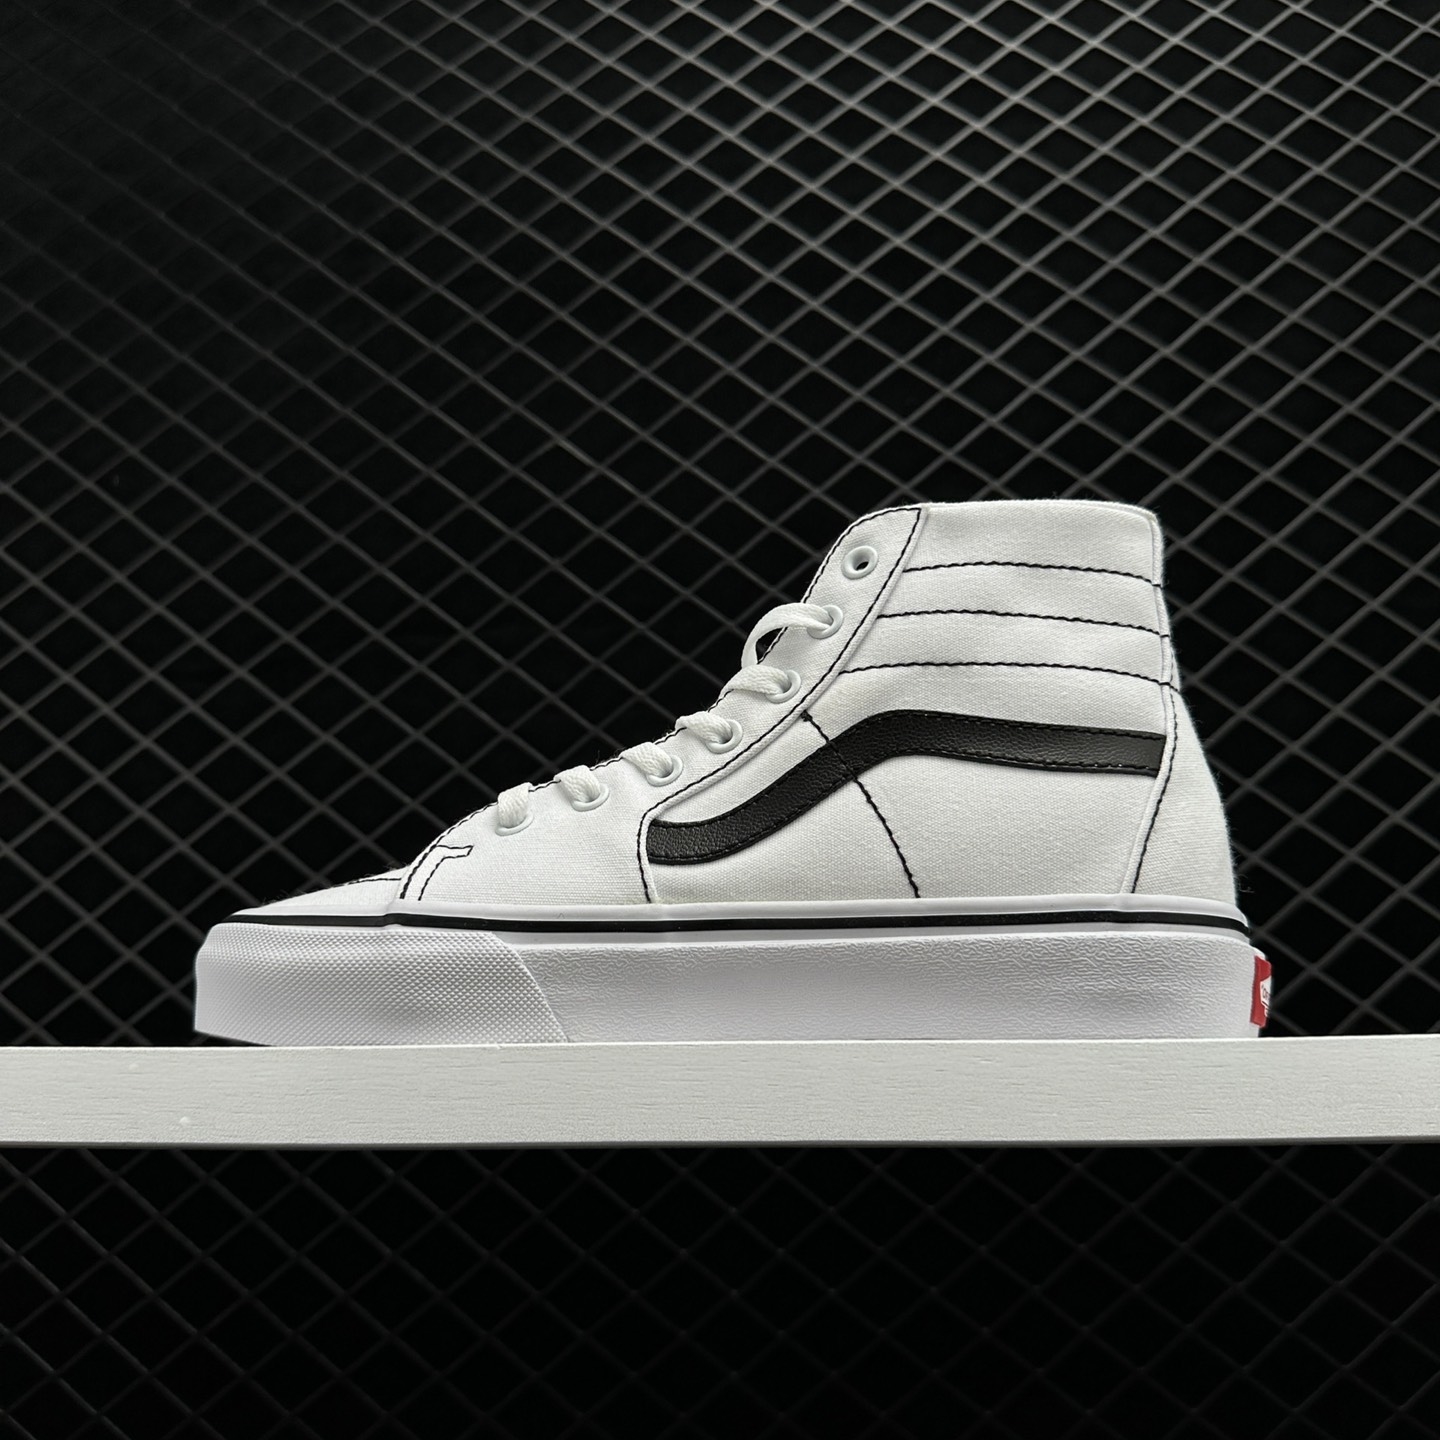 Vans SK8-HI Tapered White Unisex VN0A4U16IP2 - Stylish and Versatile Sneakers for Everyone